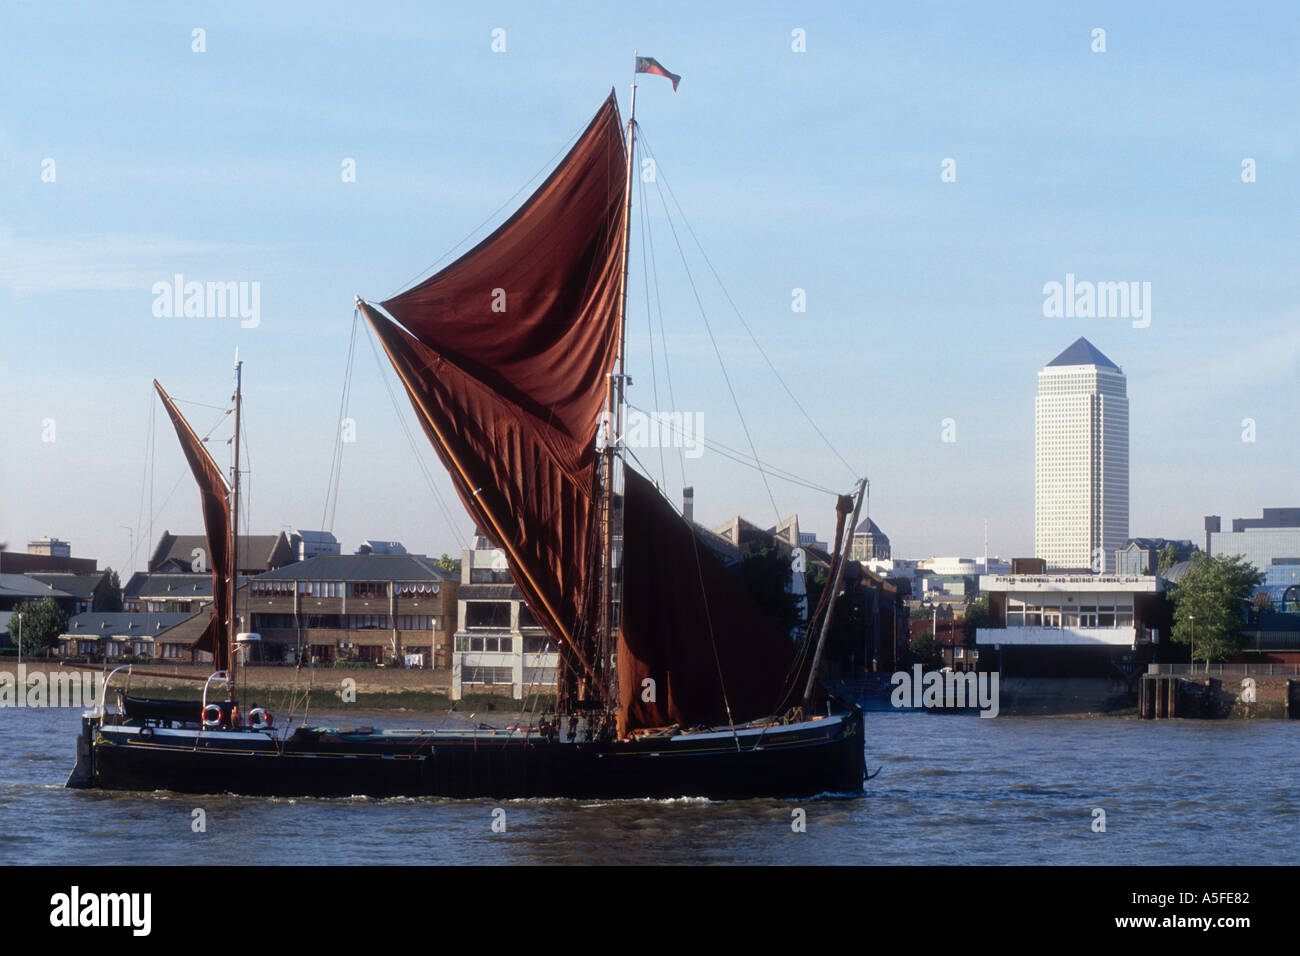 The 1895 Thames Sailing Barge Thistle on the River Thames at London England UK with 'Canary Wharf' Stock Photo